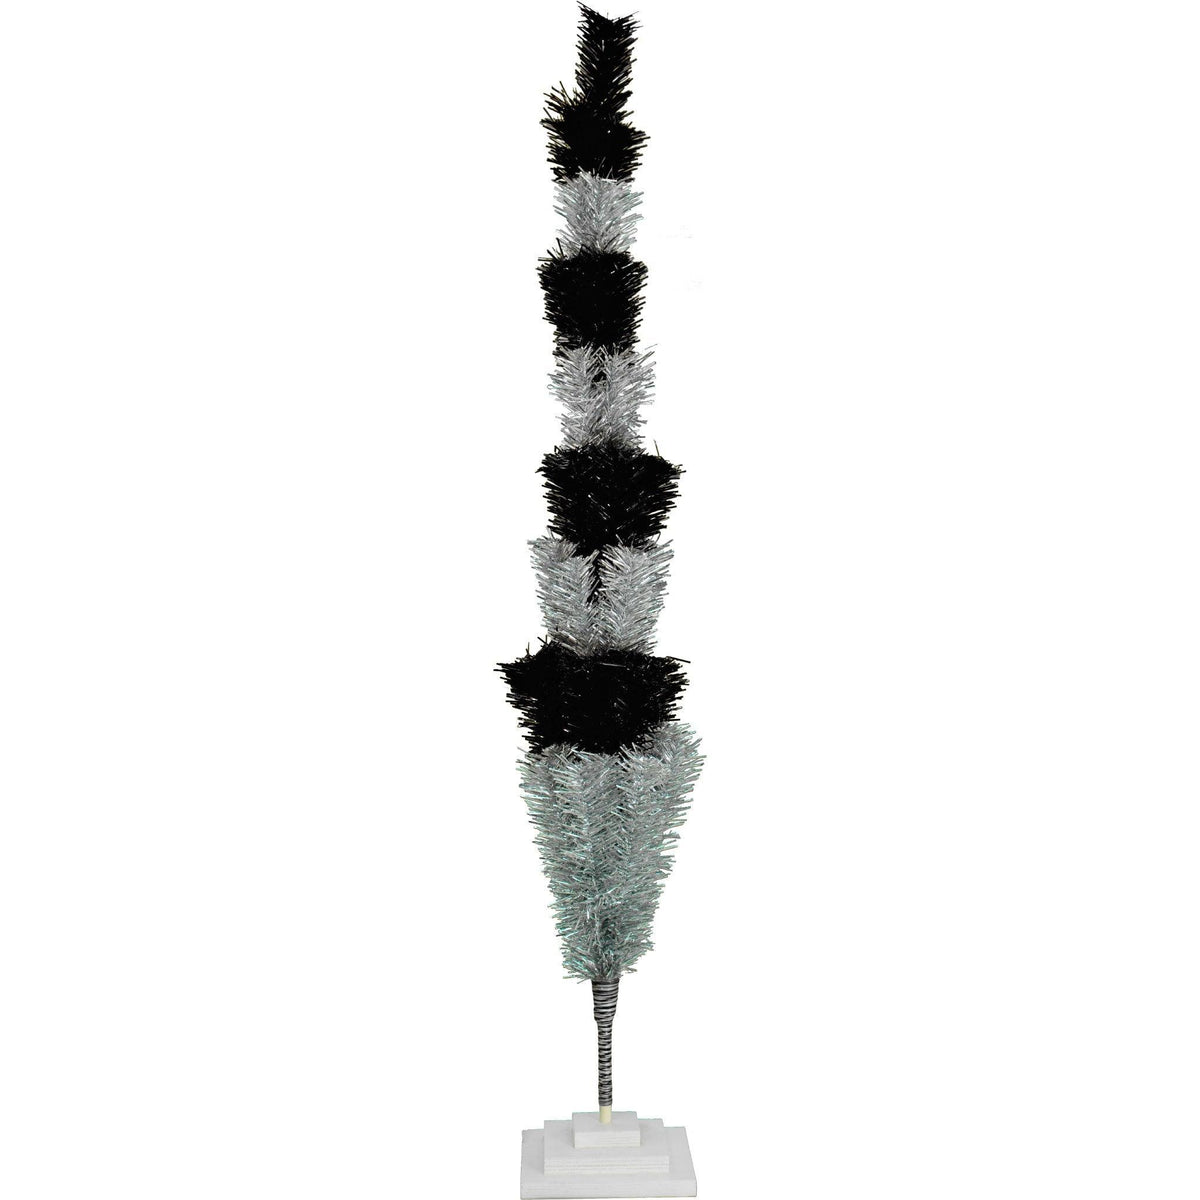 Black & Silver Layered Tinsel Christmas Trees! Decorate for the holidays with a Shiny Black and Metallic Silver retro-style Christmas Tree. On sale now at leedisplay.com